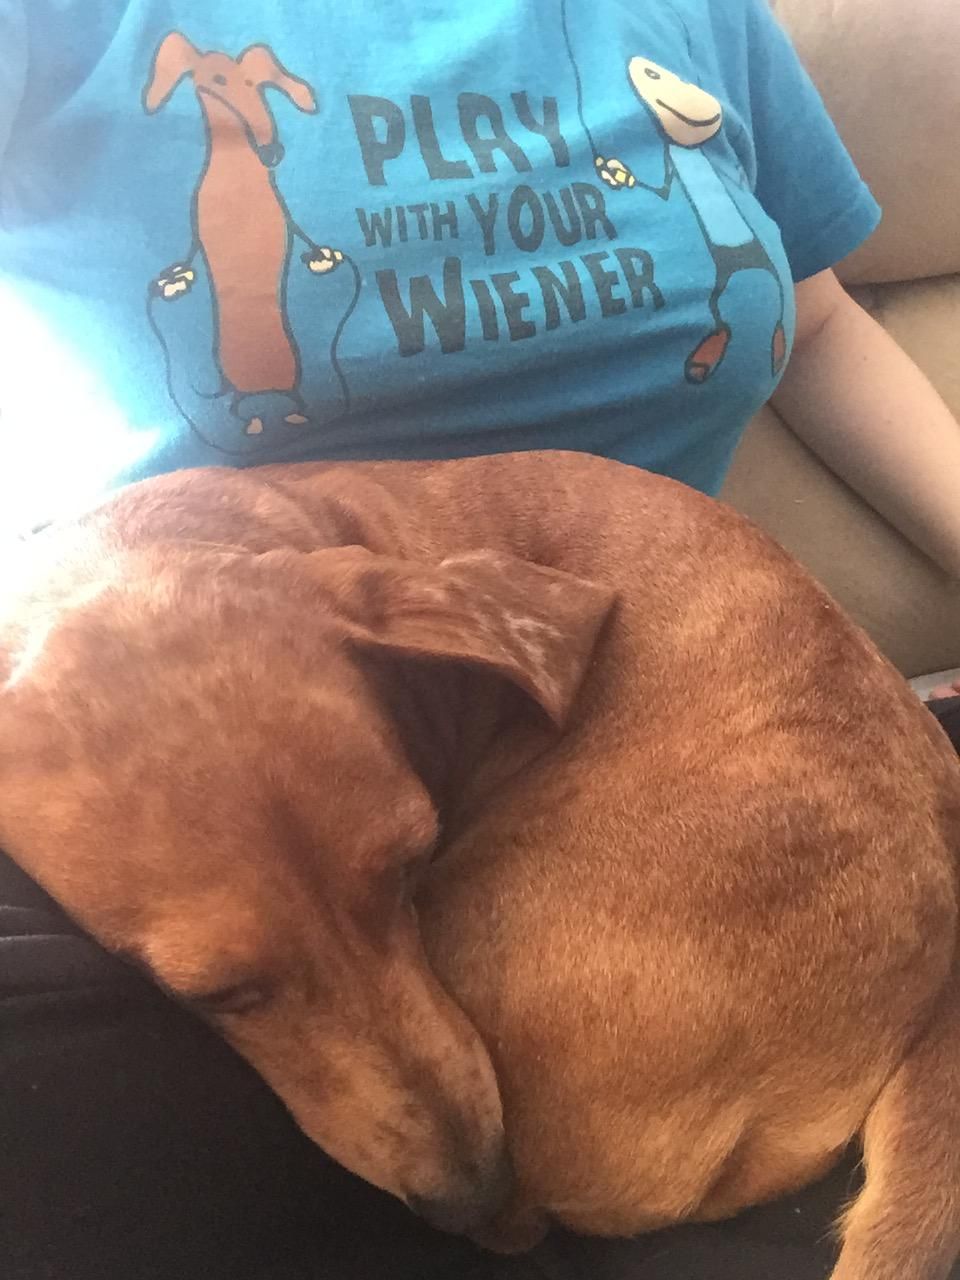 My mom cluelessly bought me this shirt, knowing I love weiner dogs.